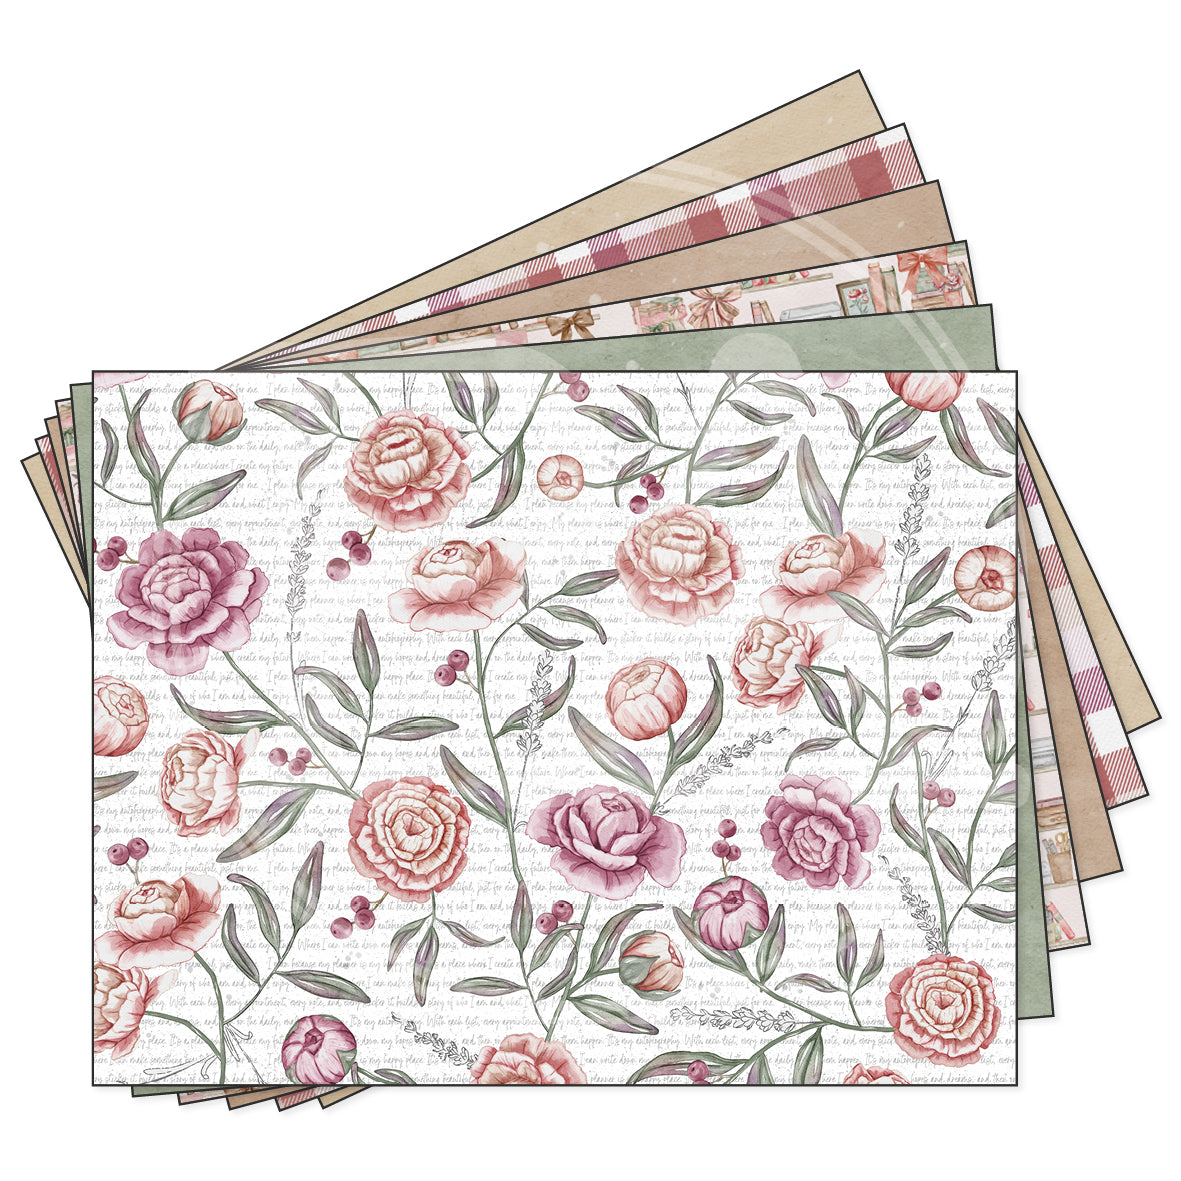 PlannerLove decorative papers - additional